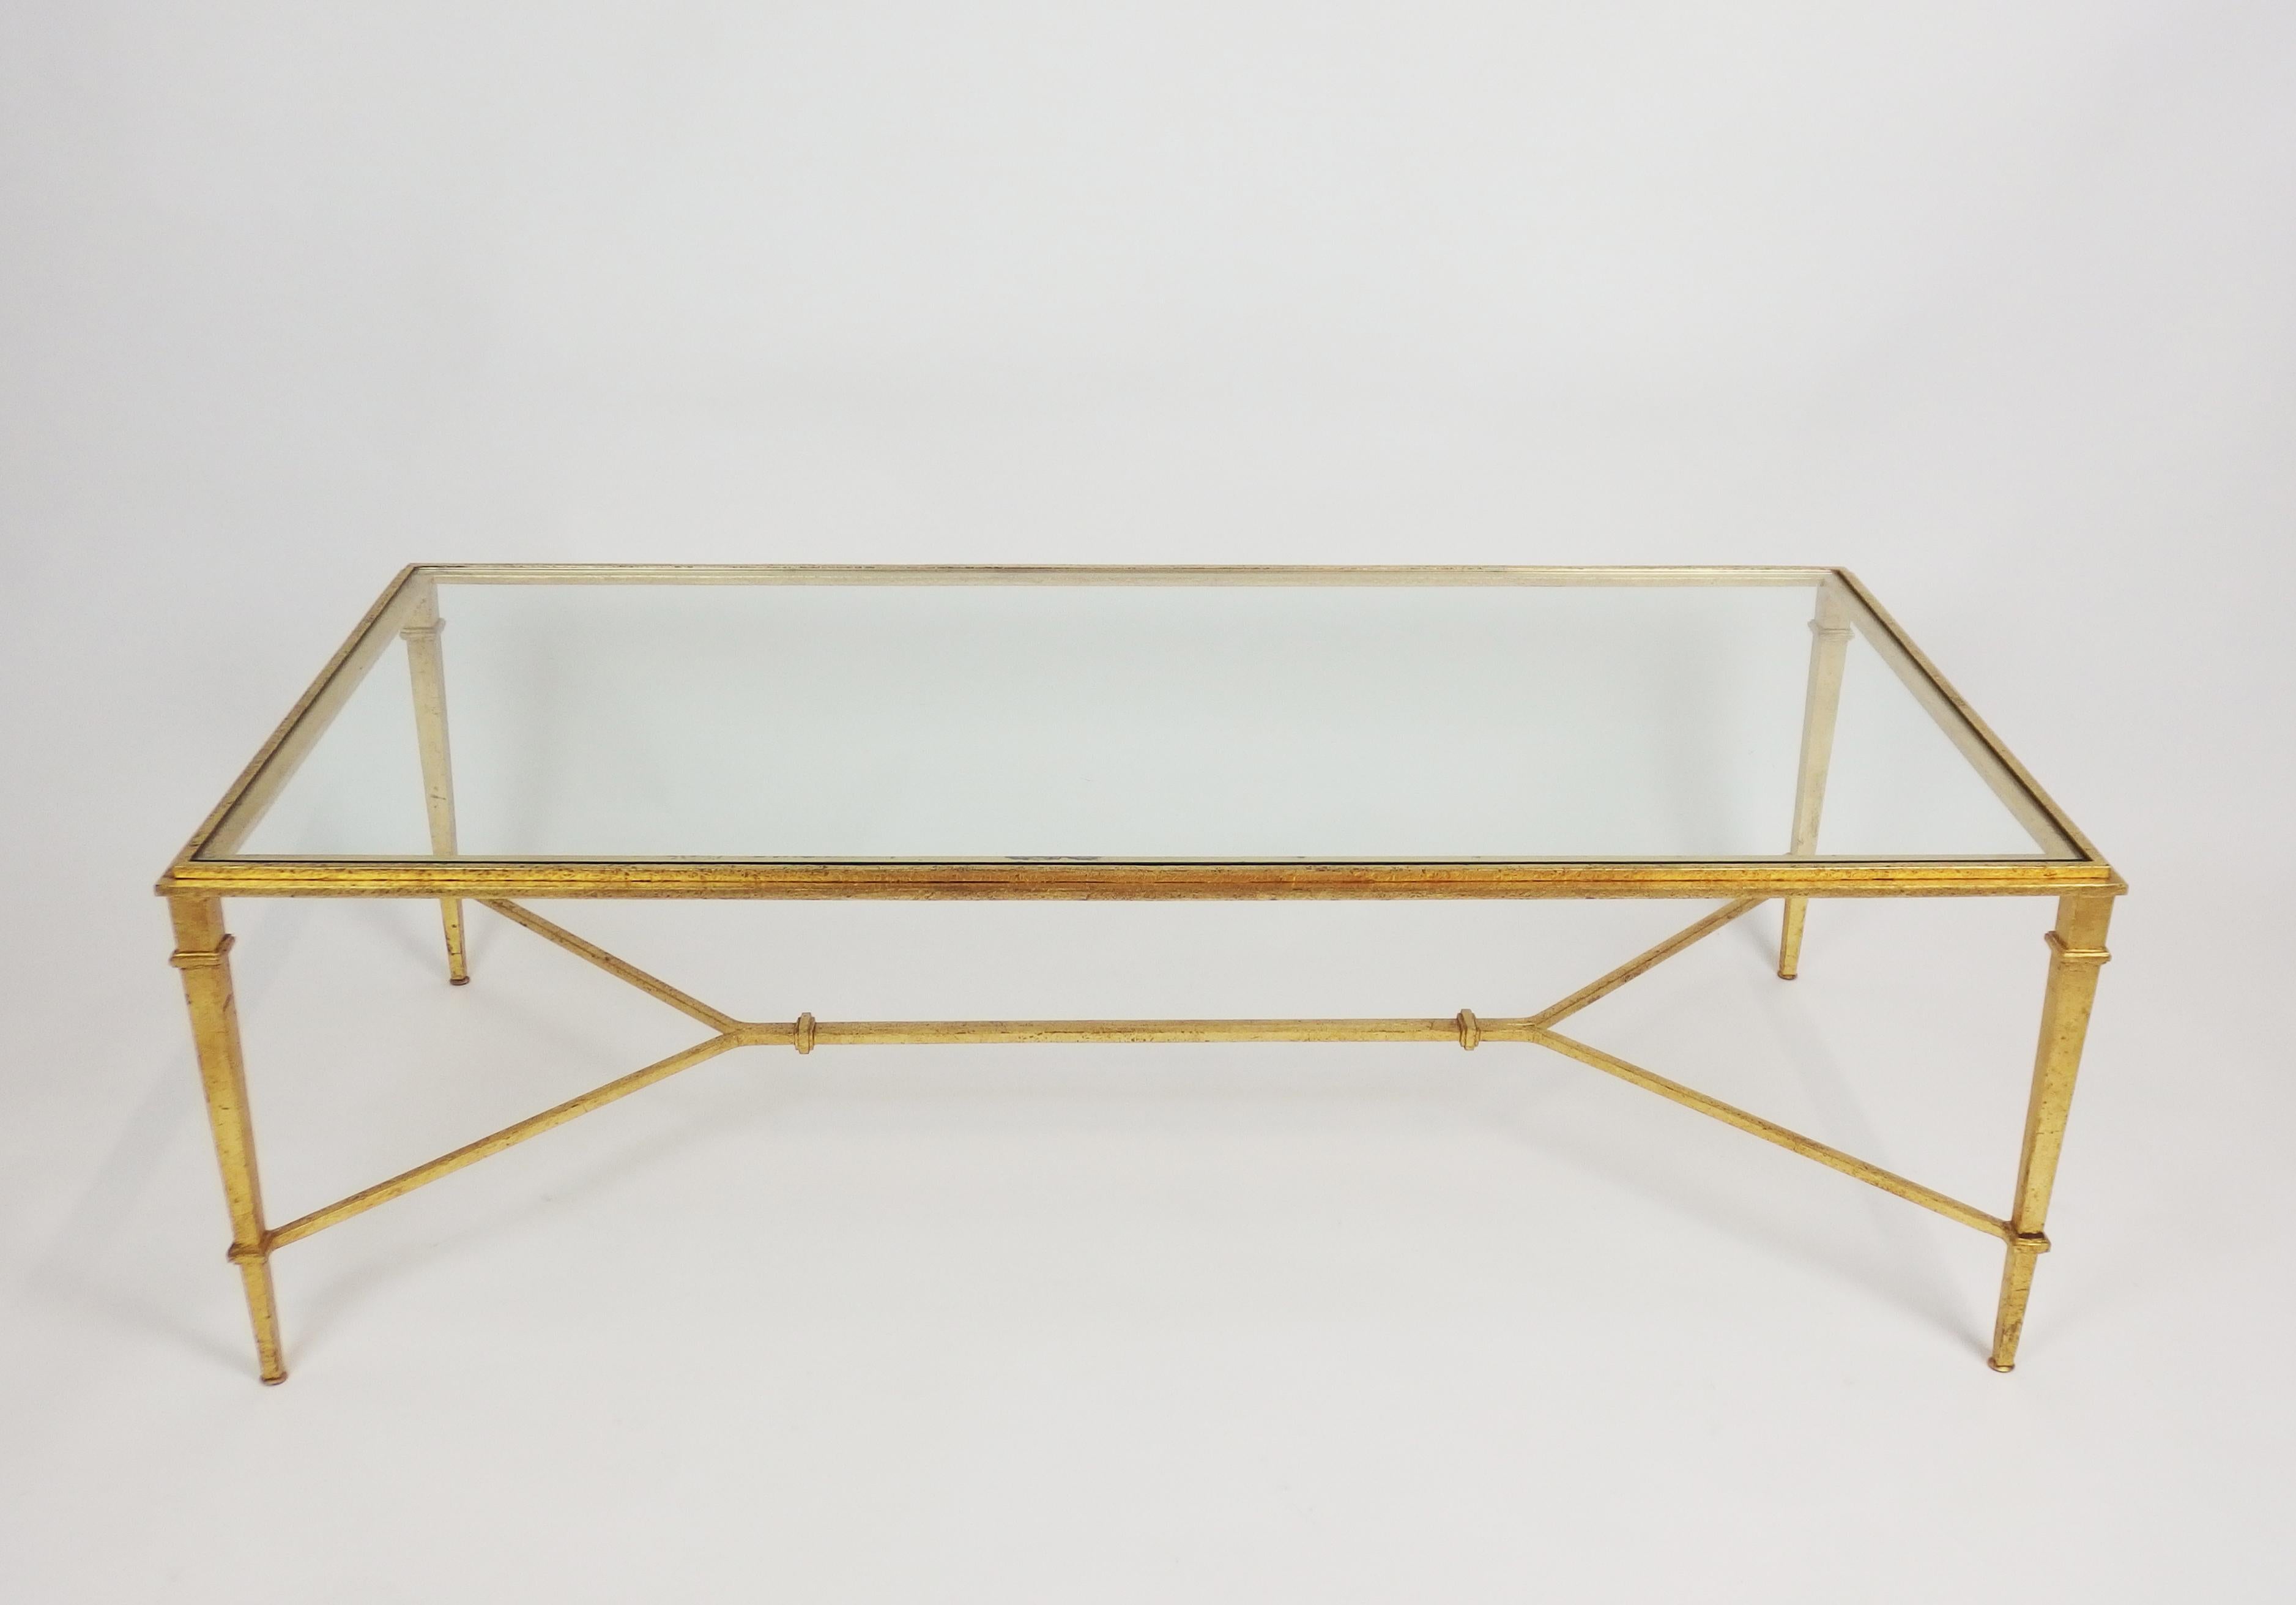 Refined styling gilt wrought iron coffee table with adjustable table base screws and translucent glass top. Designed by Robert & Roger Thibier & stamped R Thibier.